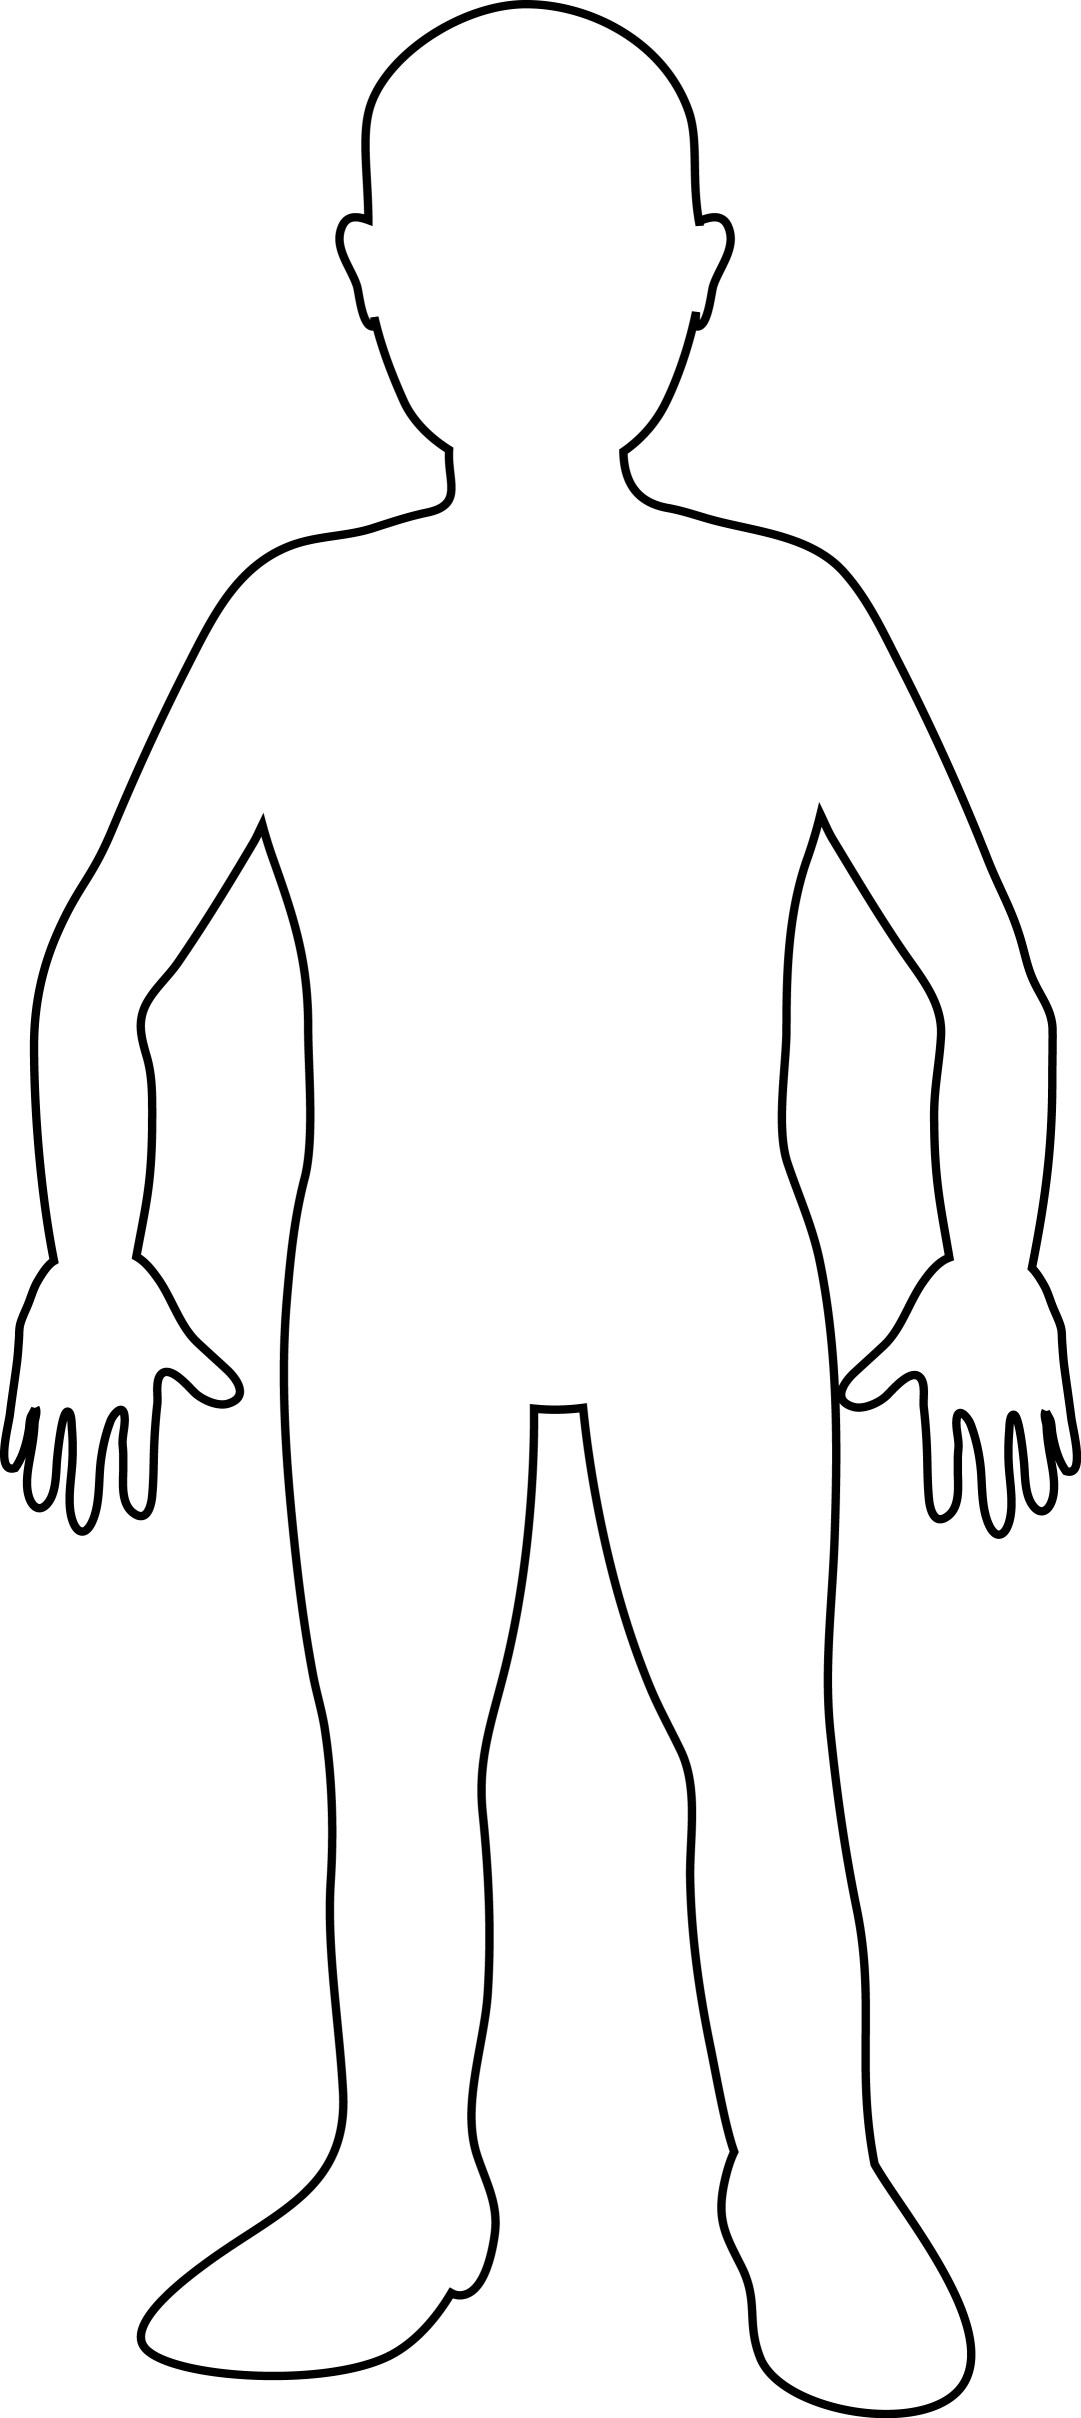 Person Outline Coloring Page Cliparts.co